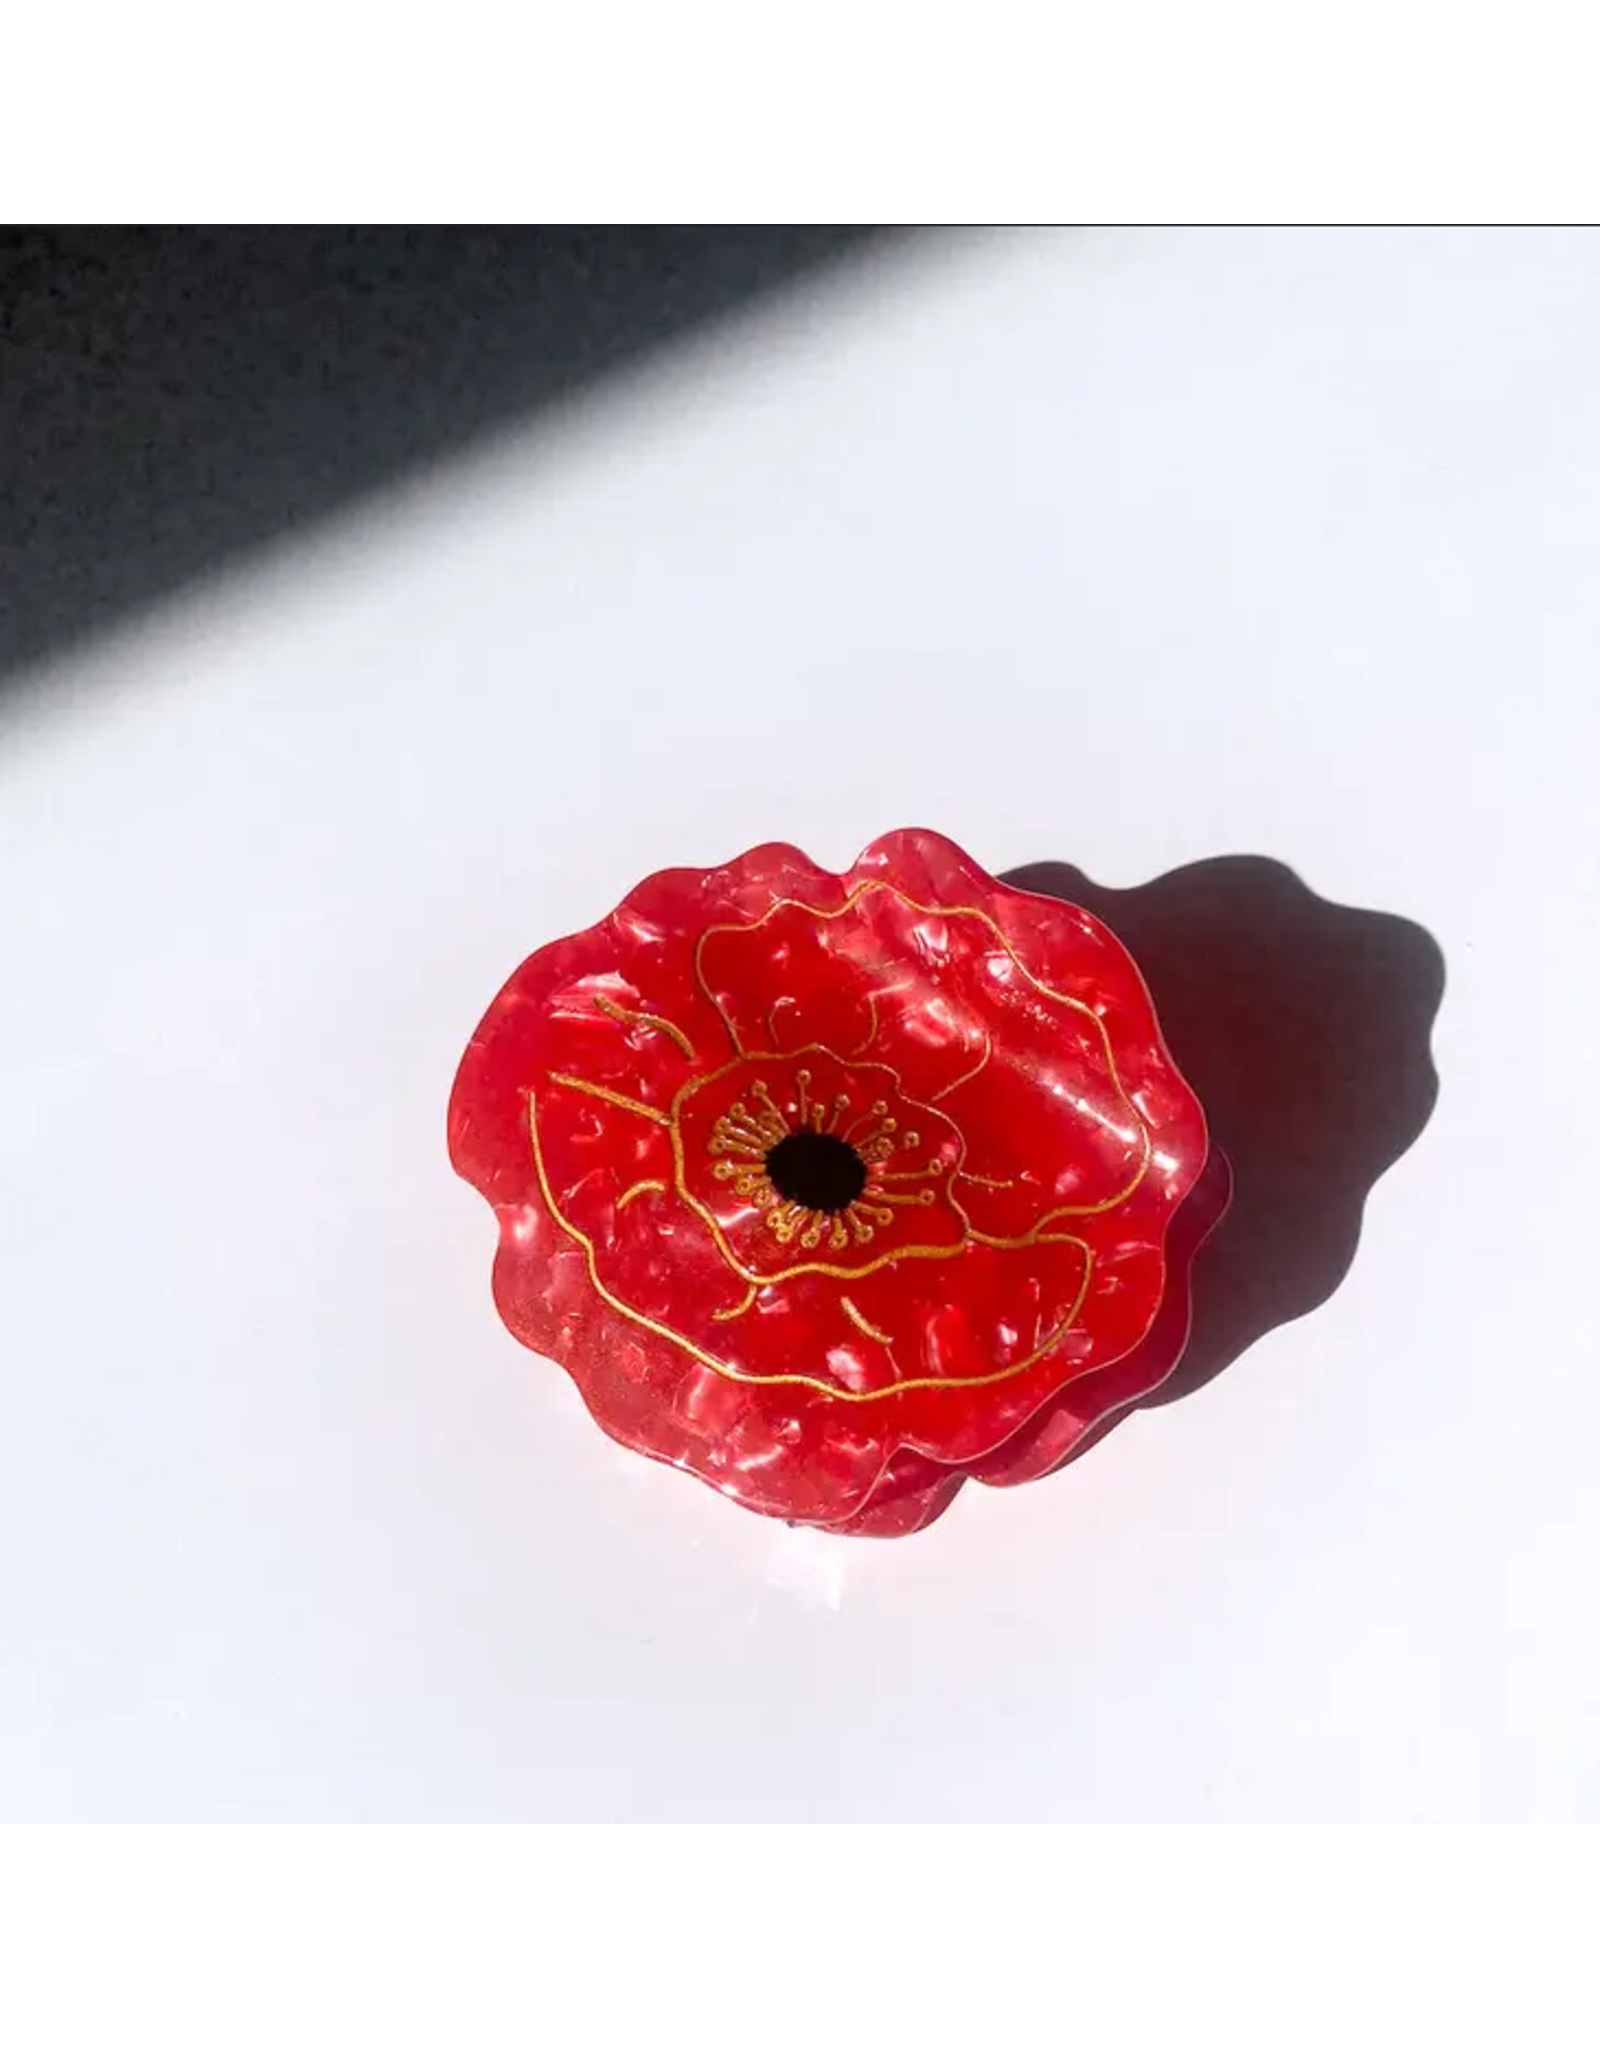 Solar Eclipse Hand-Painted Red Poppy Hair Clip